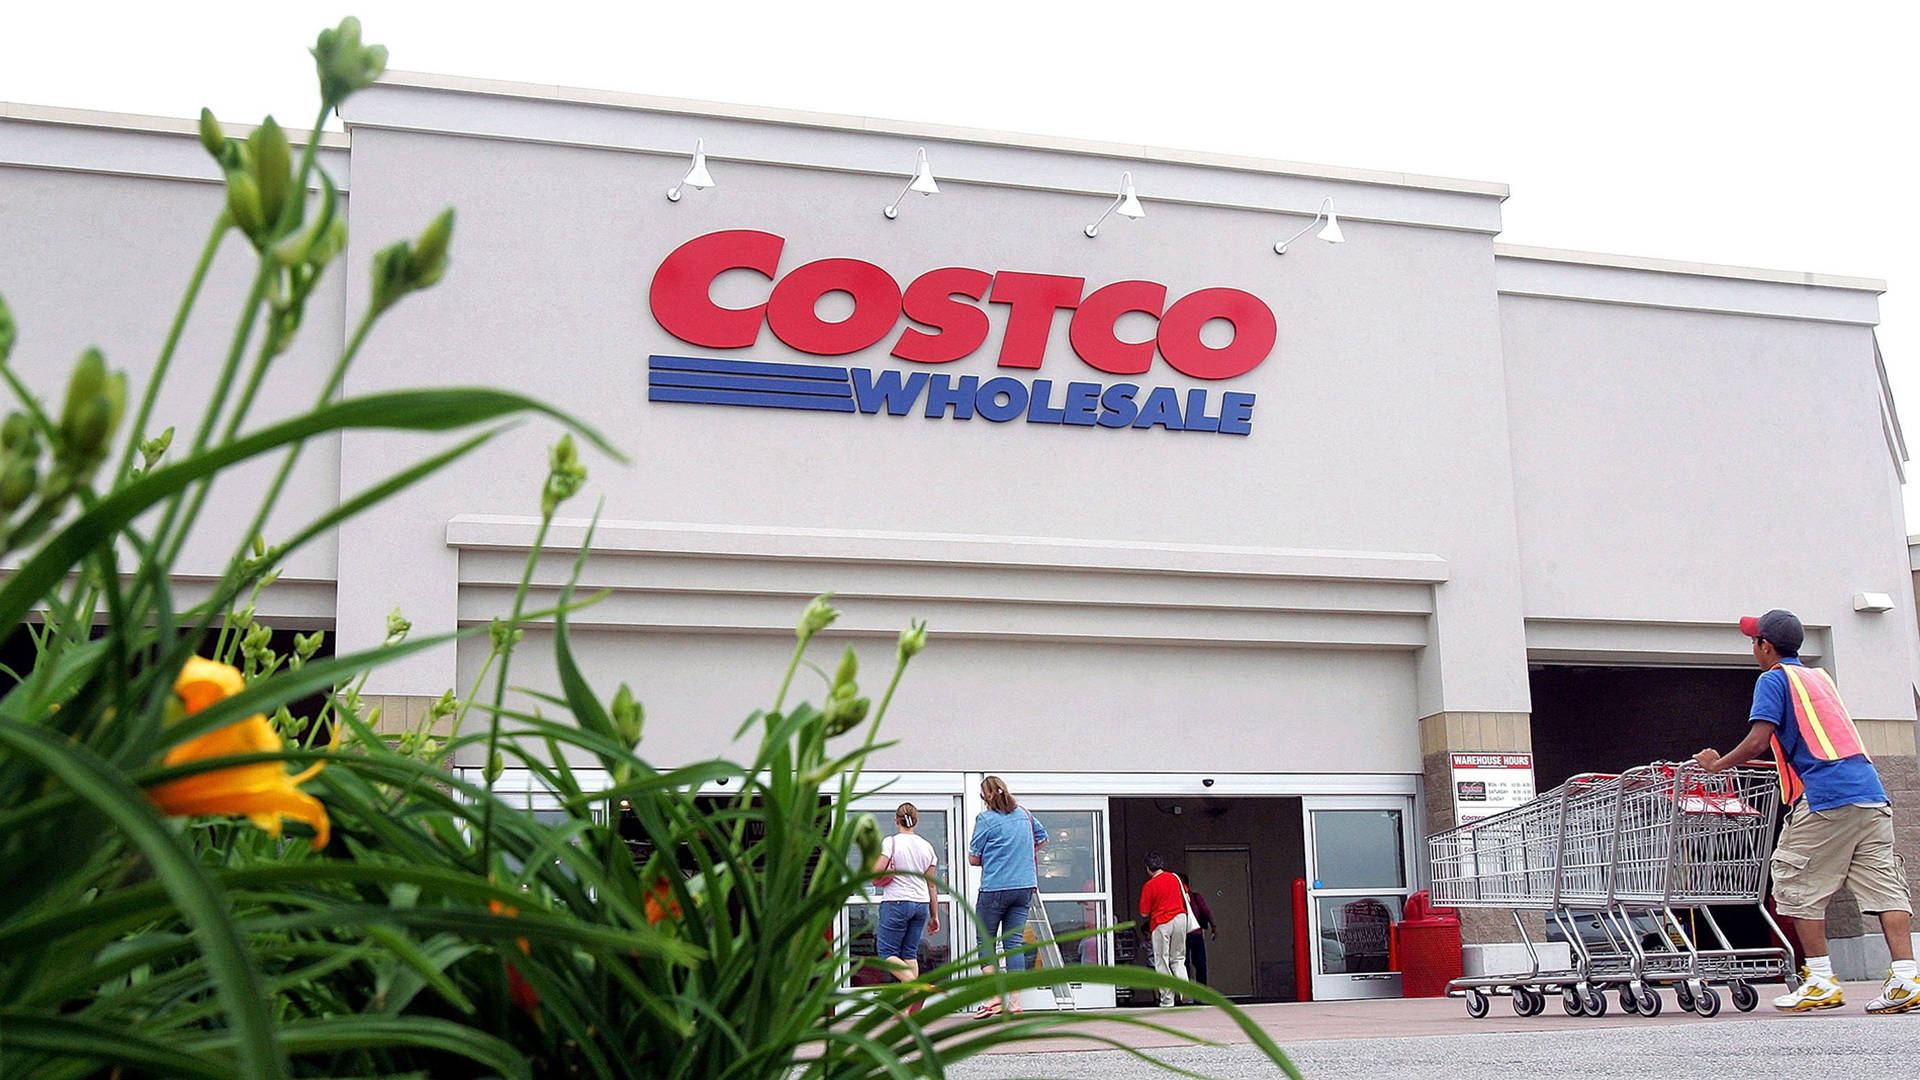 Shoppers Going Inside Costco Wholesale Wallpaper